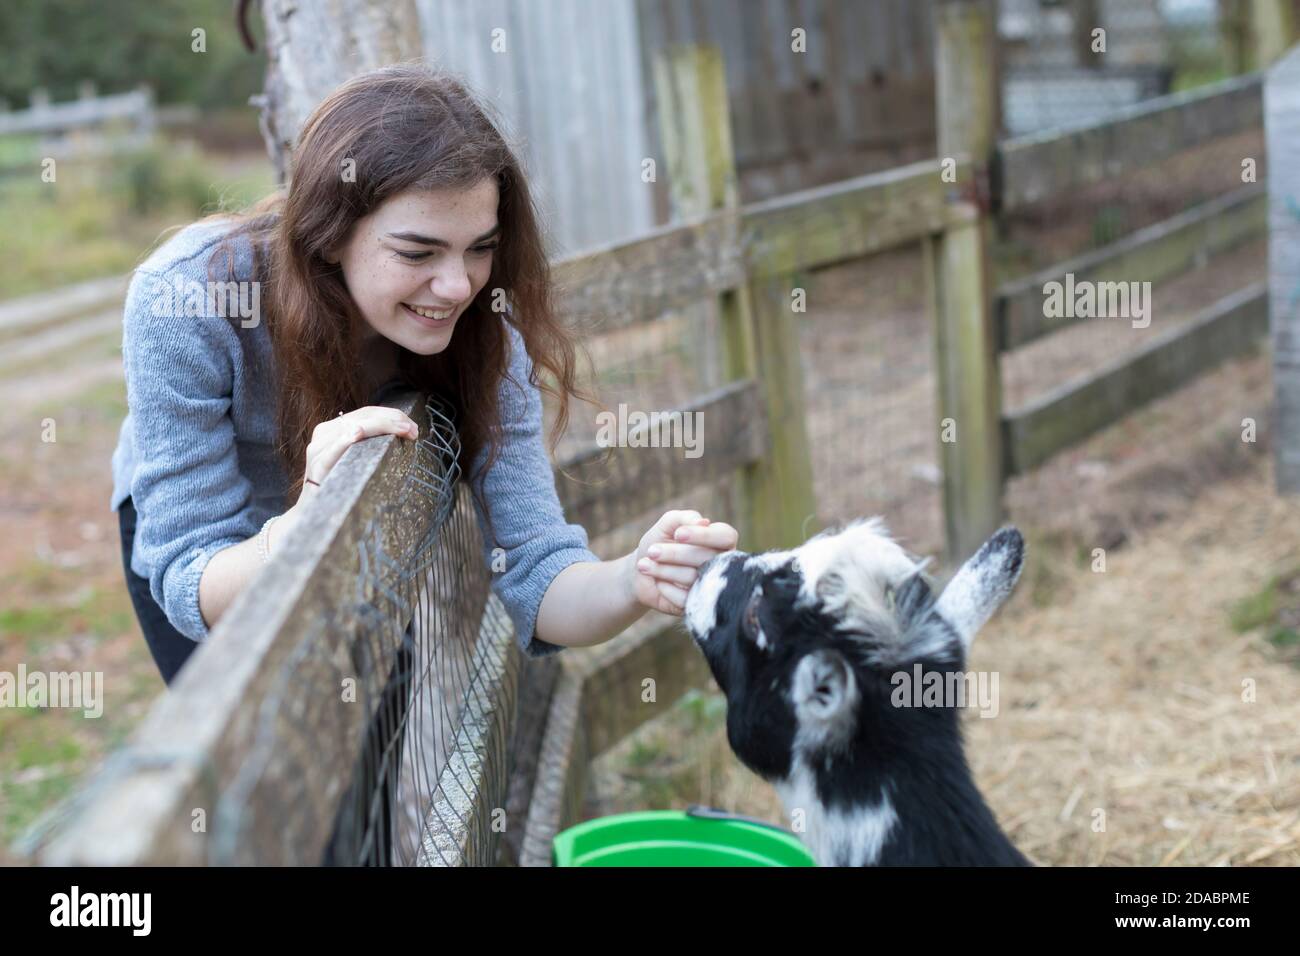 Pretty teenage girl smiling and petting goat in farm setting Stock Photo